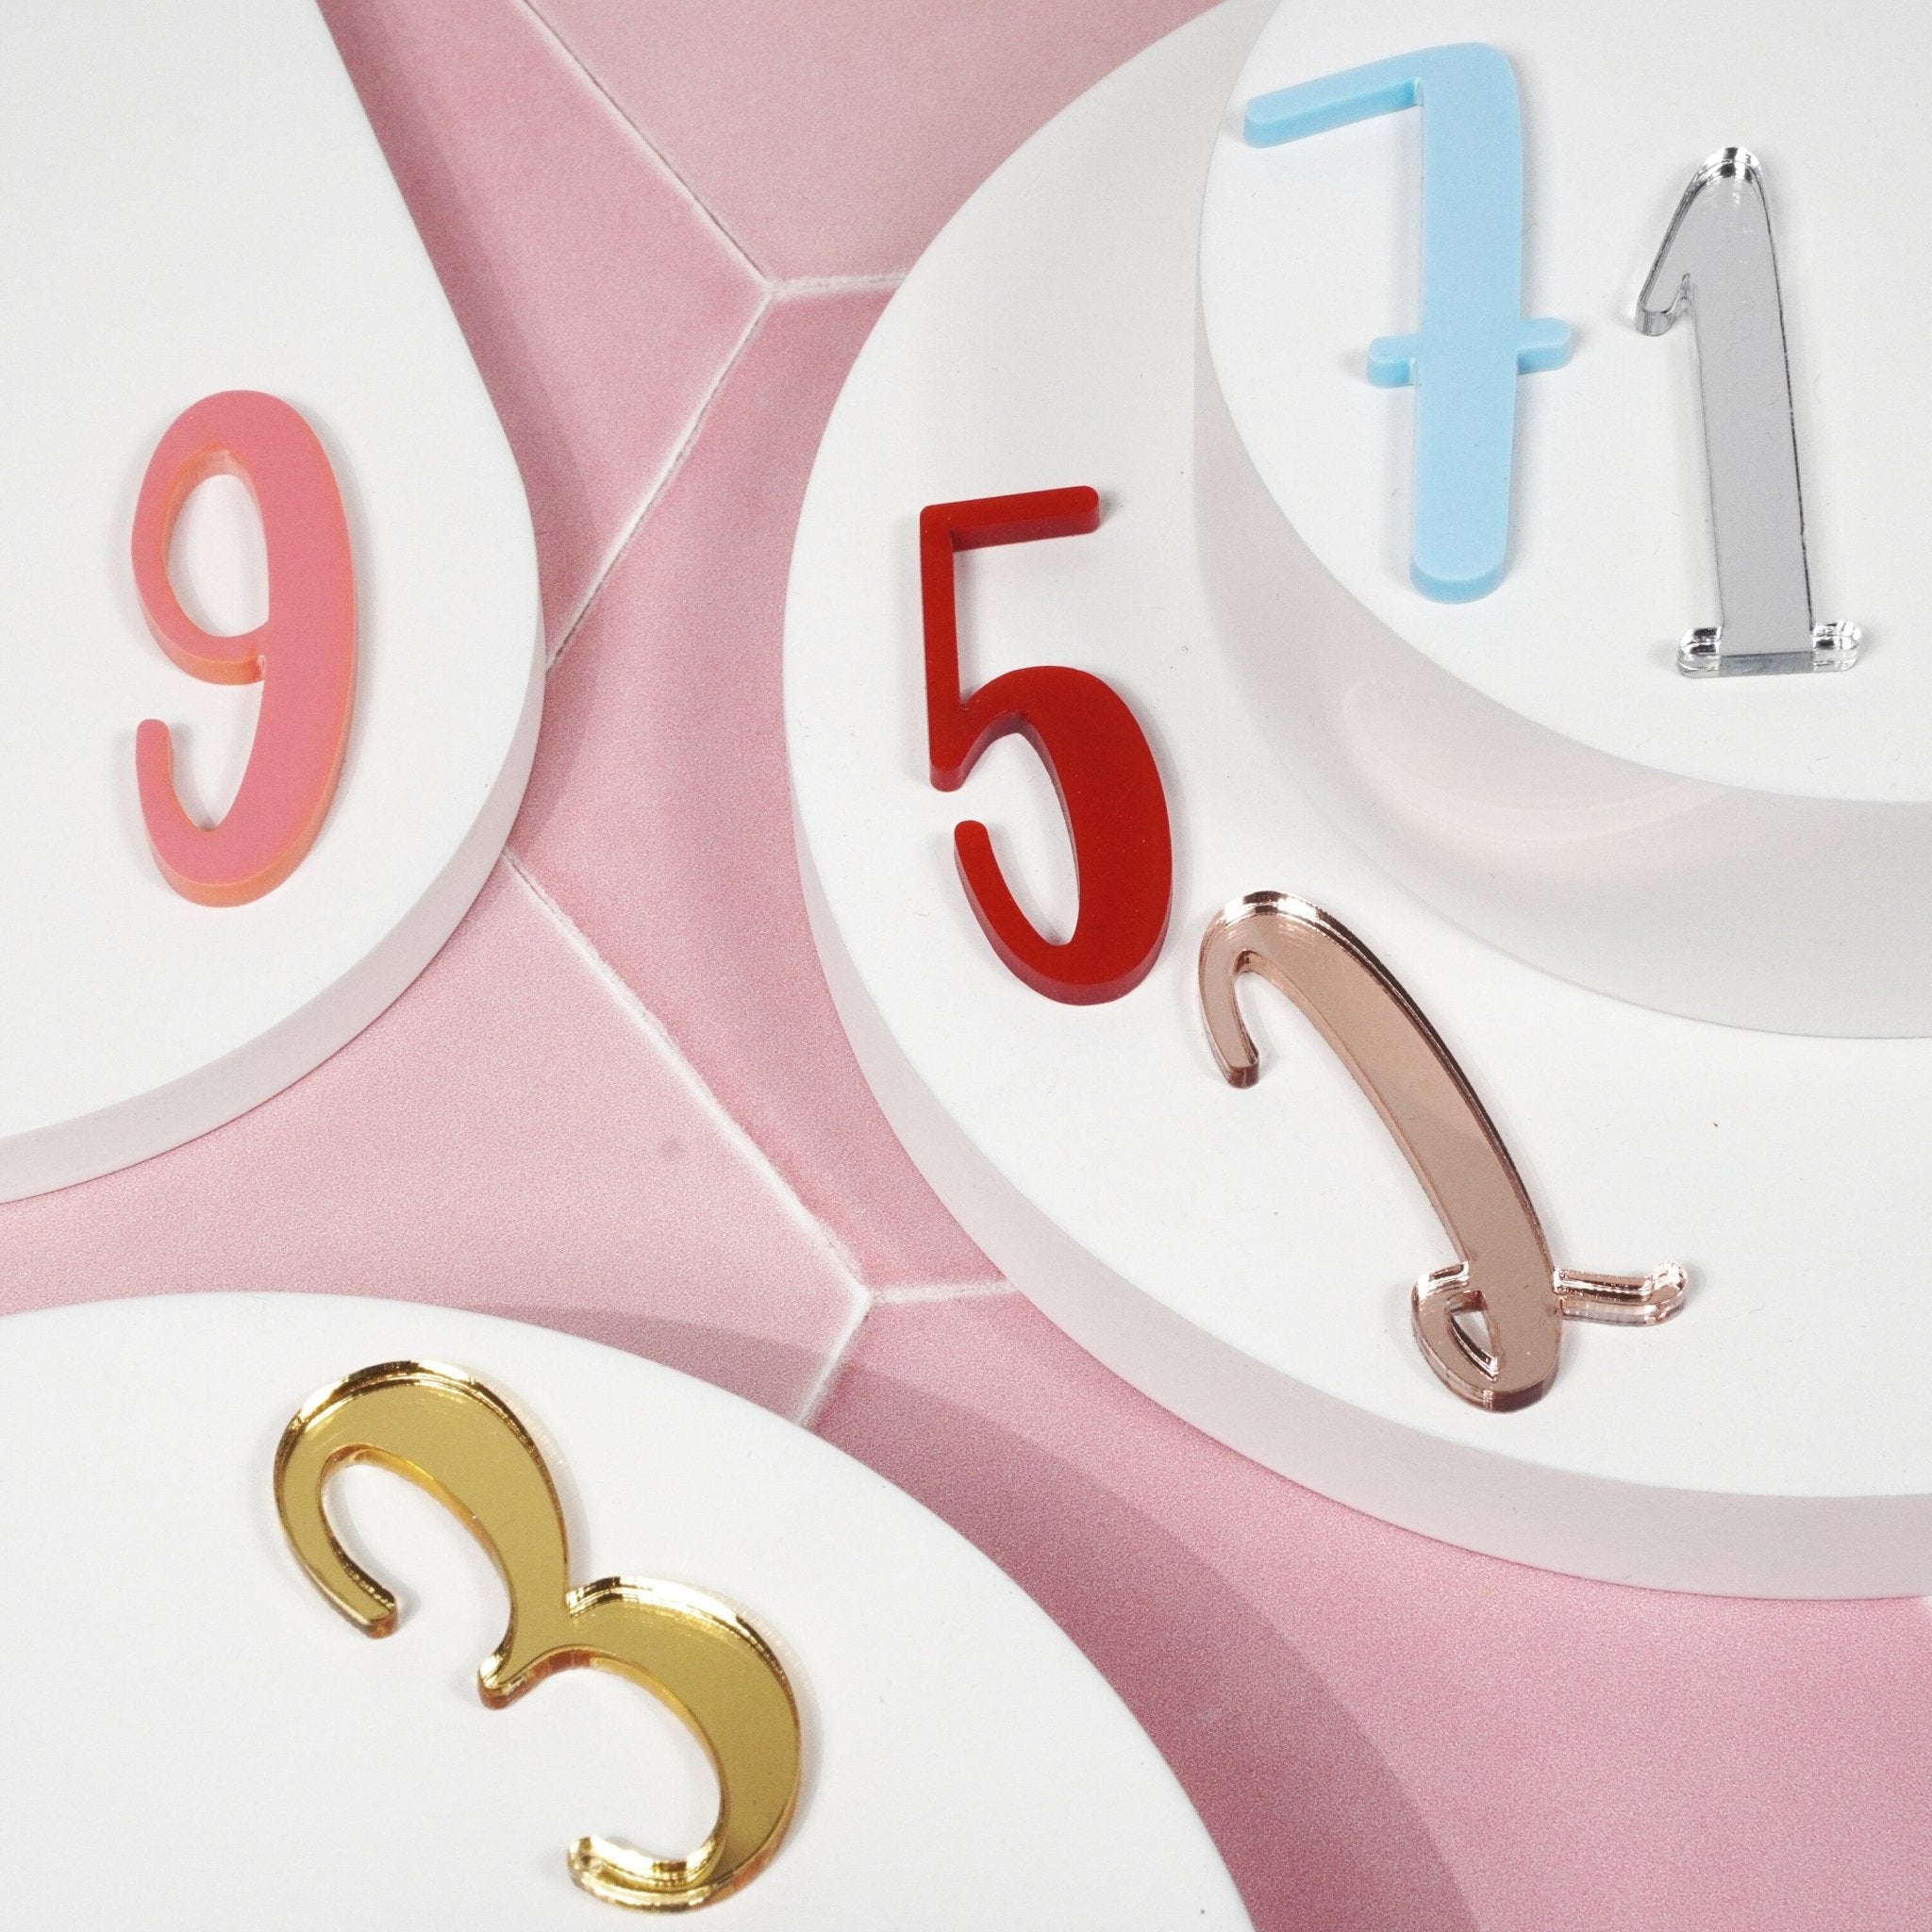 Acrylic Cake Charm Number Cake Topper